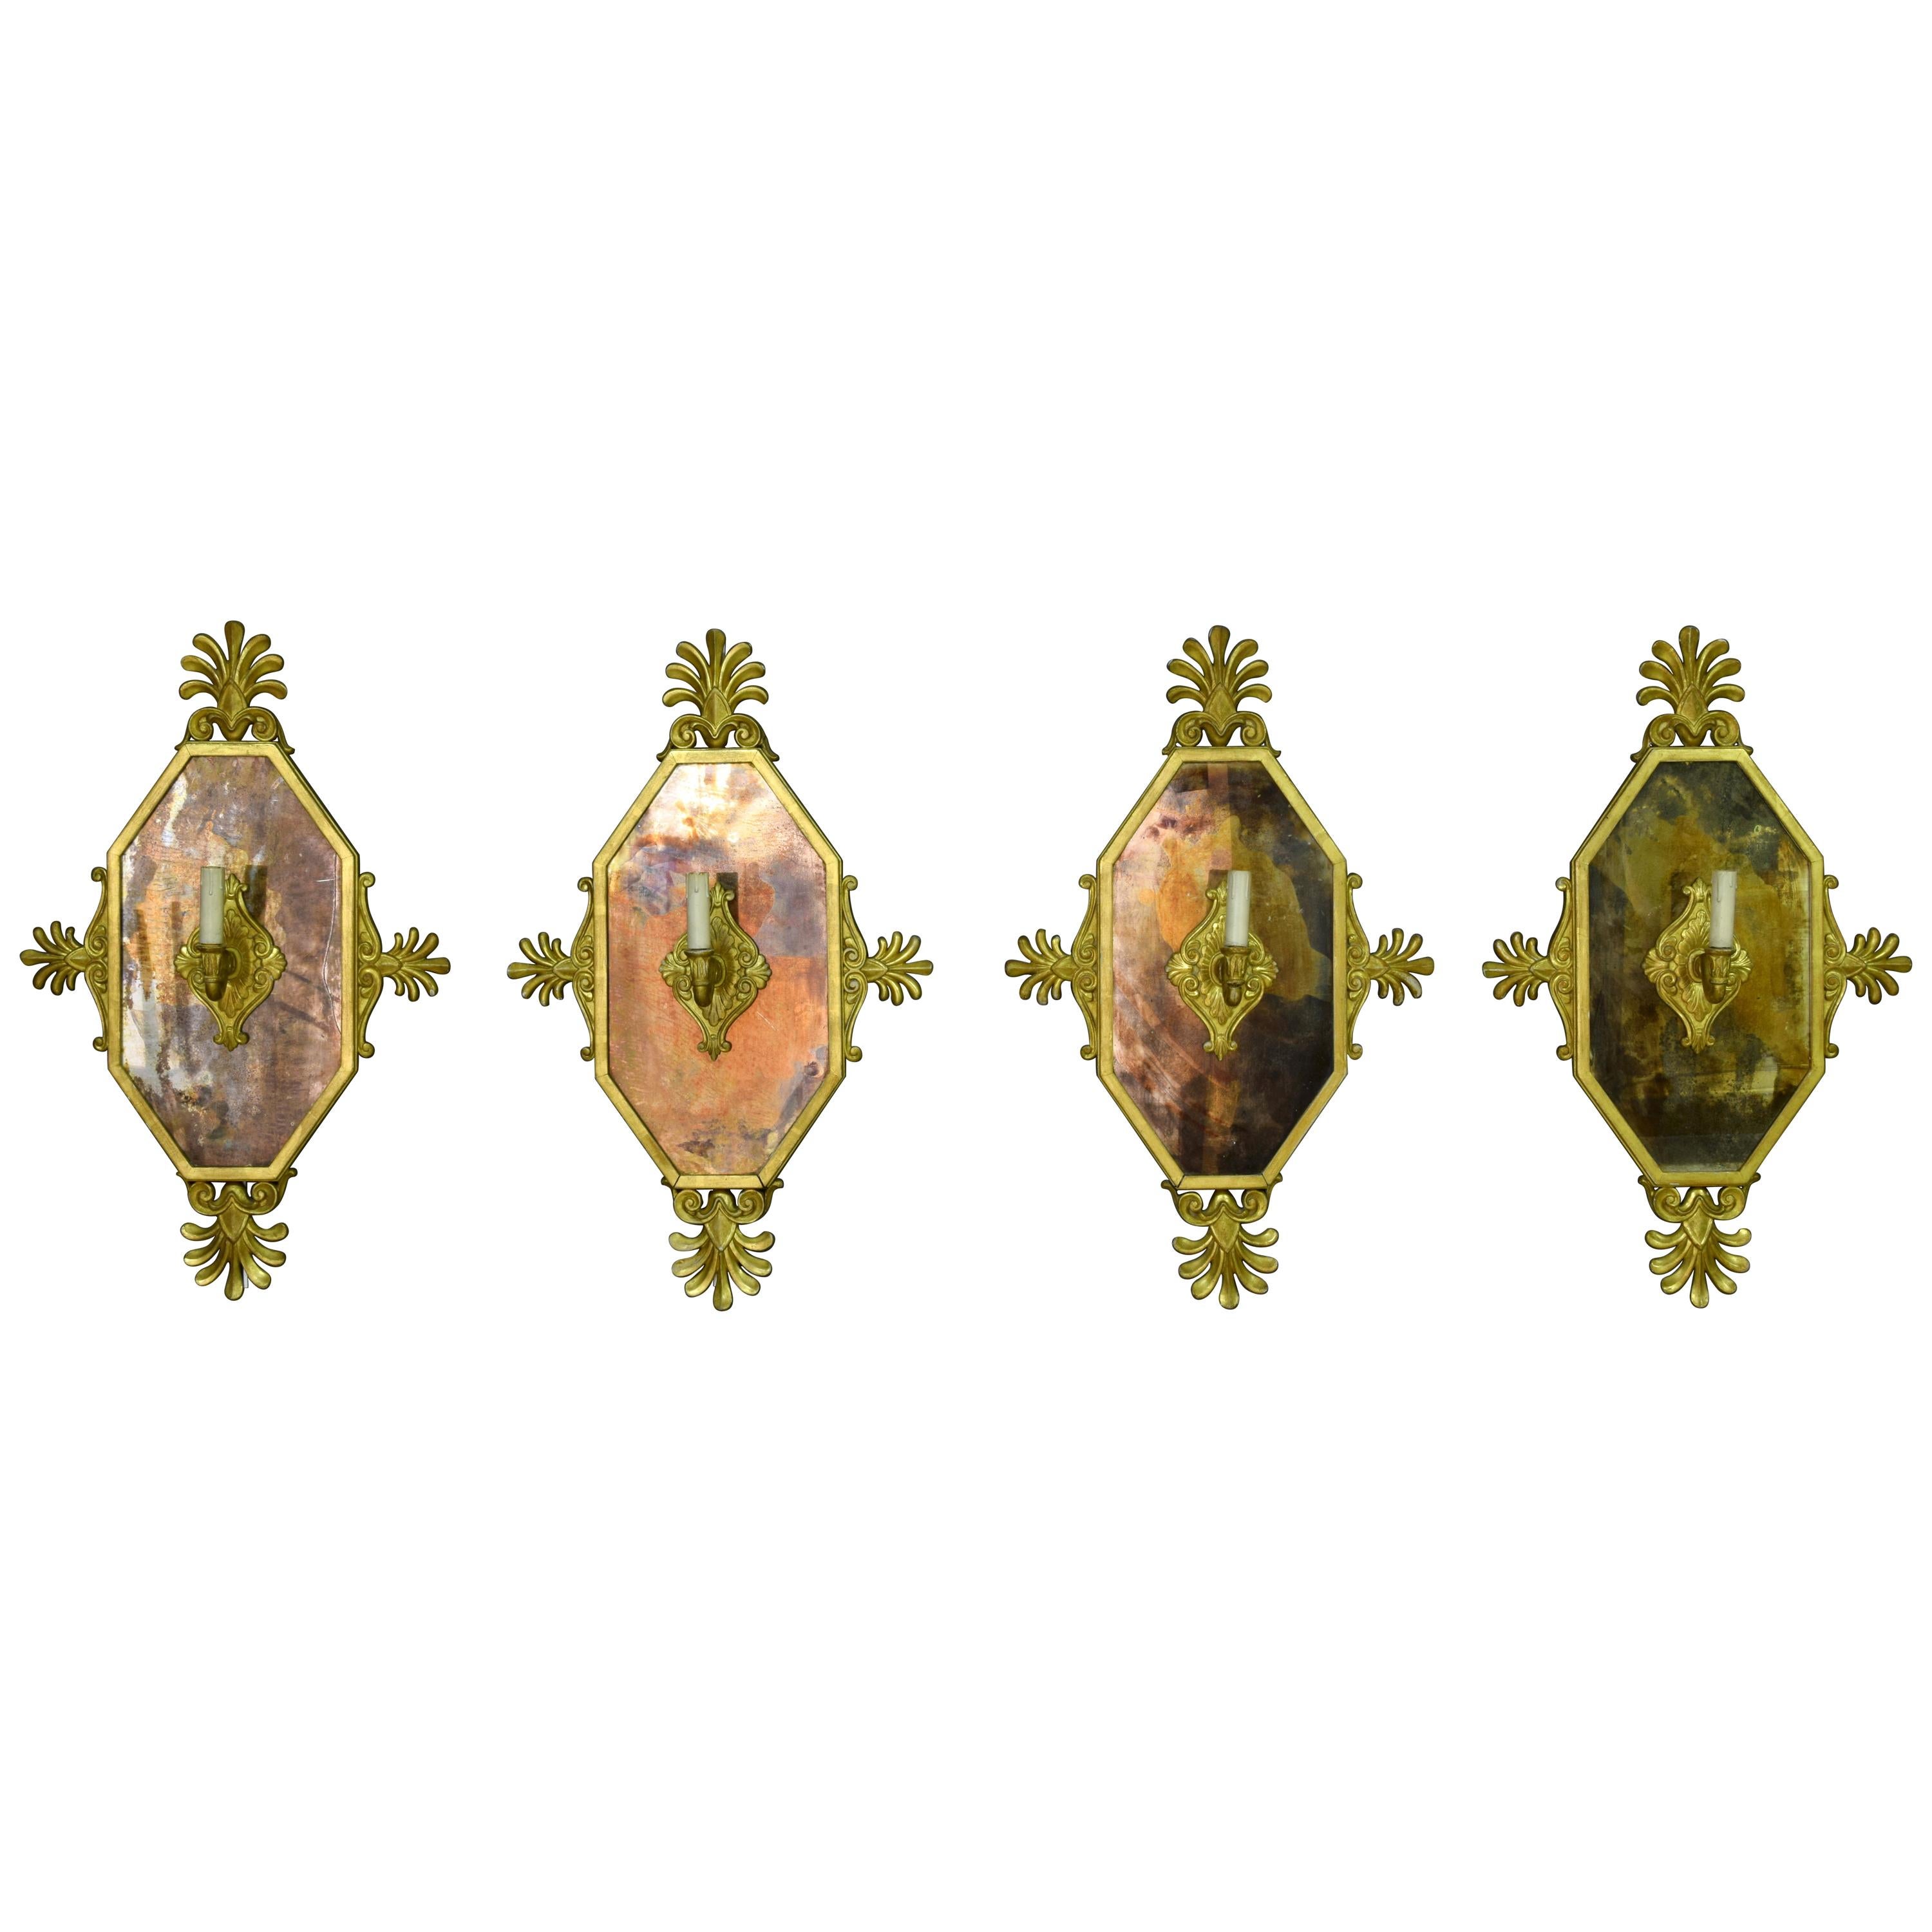 19th Century, Four Empire Style Giltwood Wall Applique